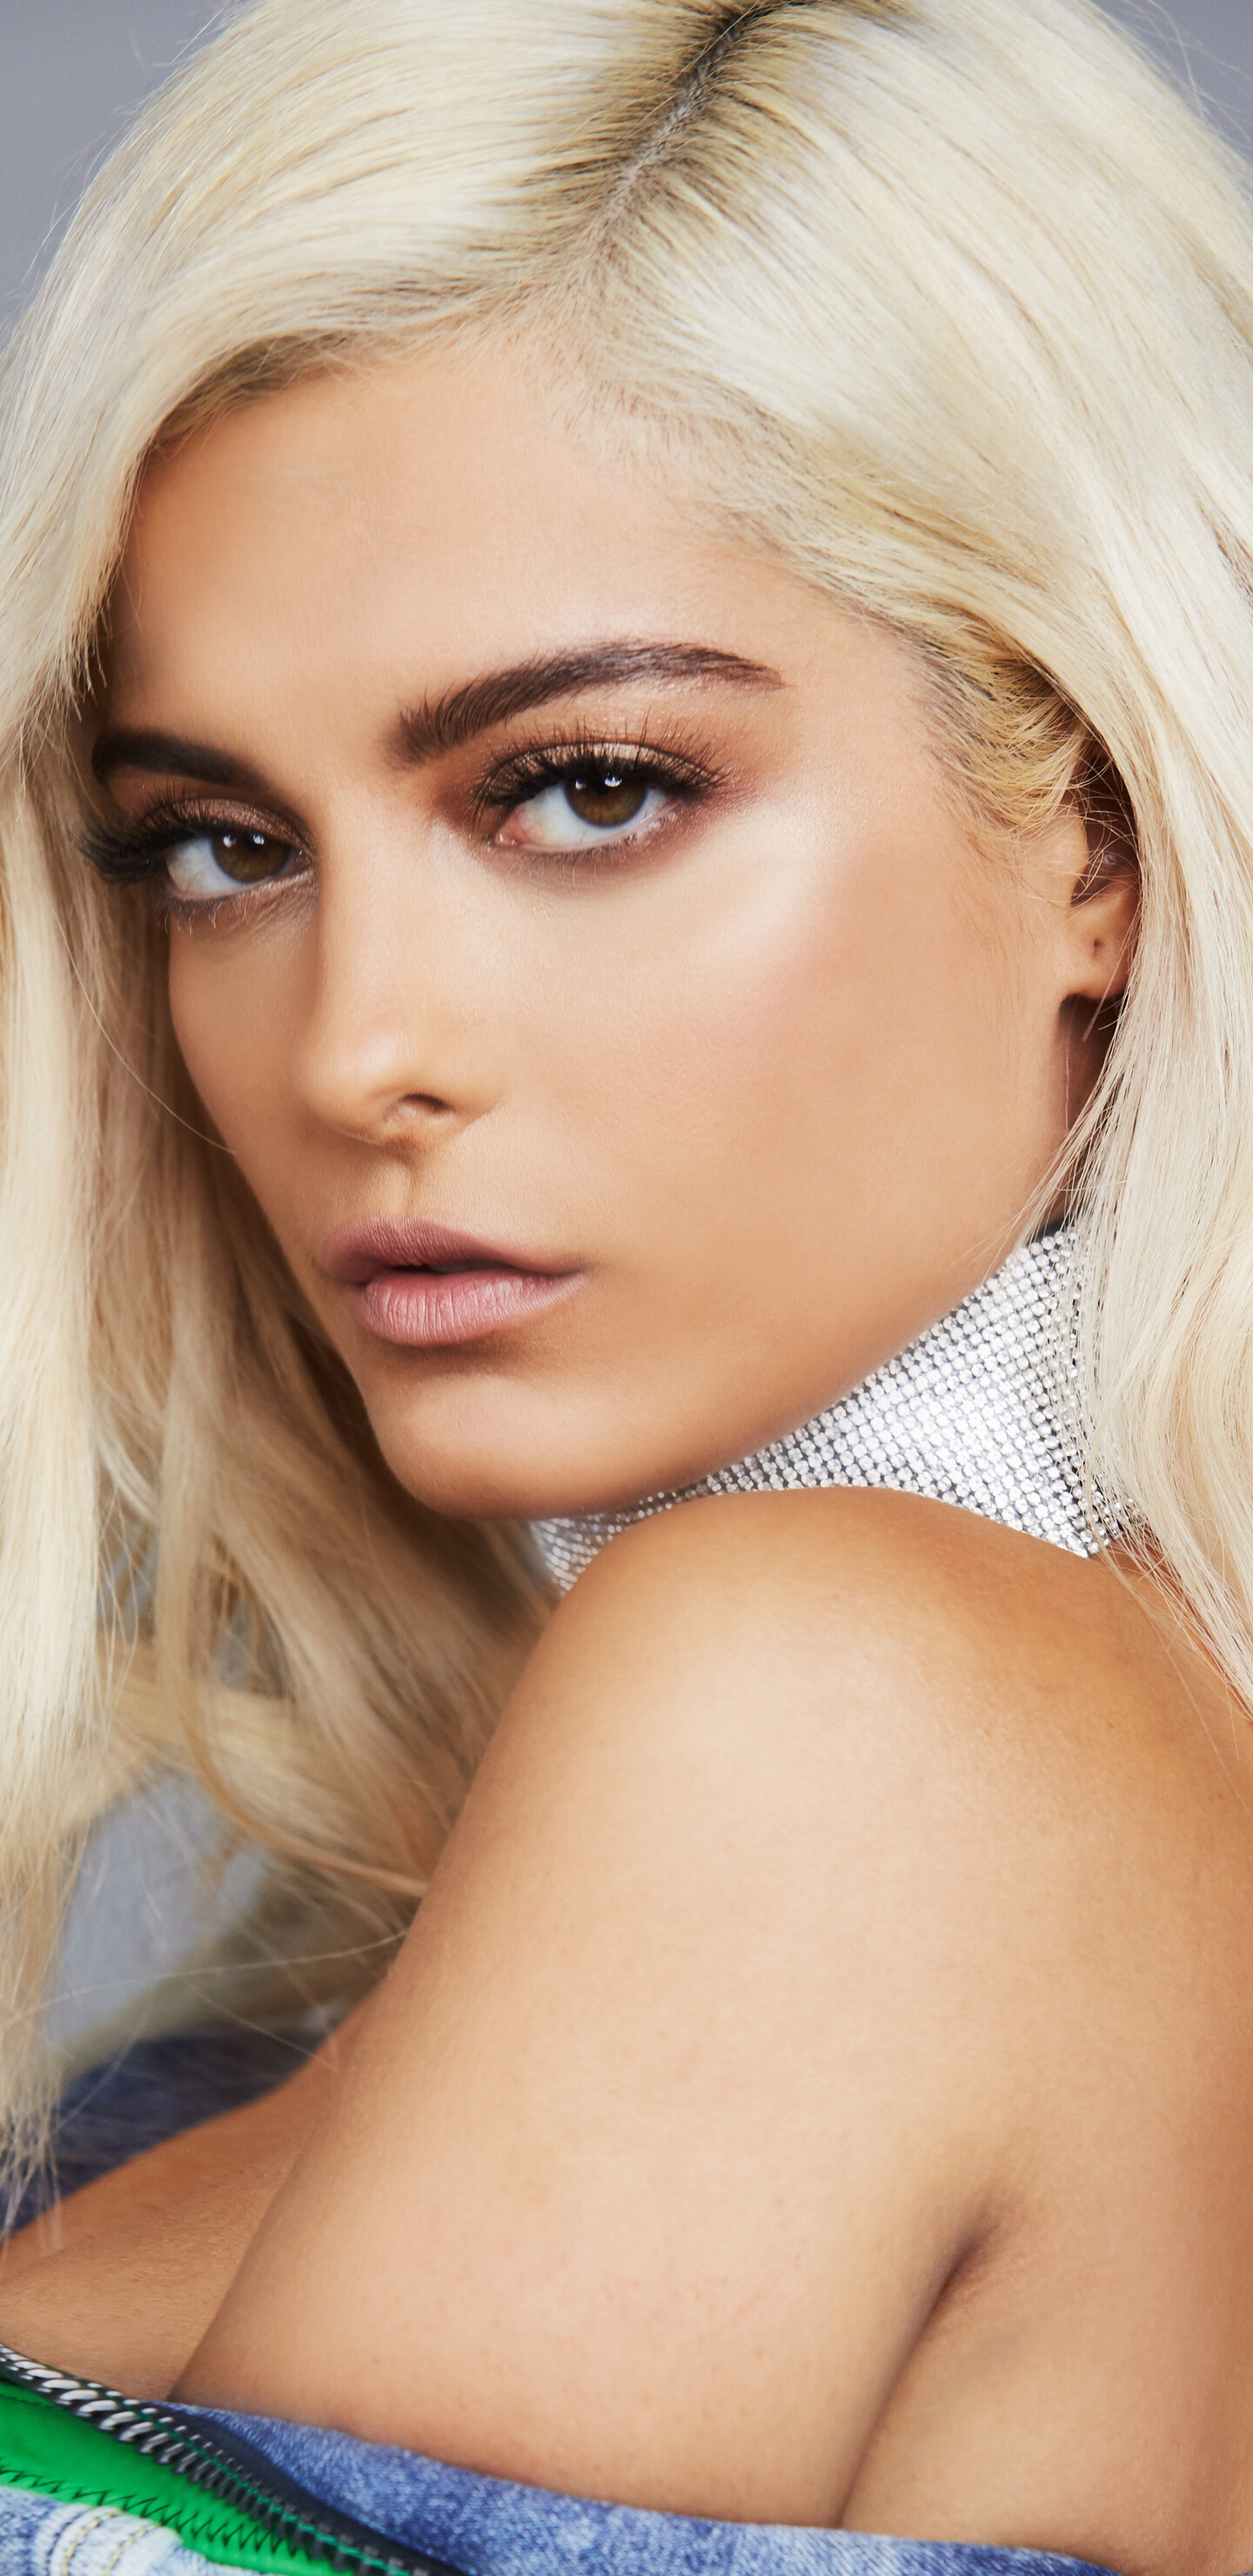 Bebe Rexha: The singer released her second studio album, Better Mistakes, in 2021. 1440x2960 HD Background.